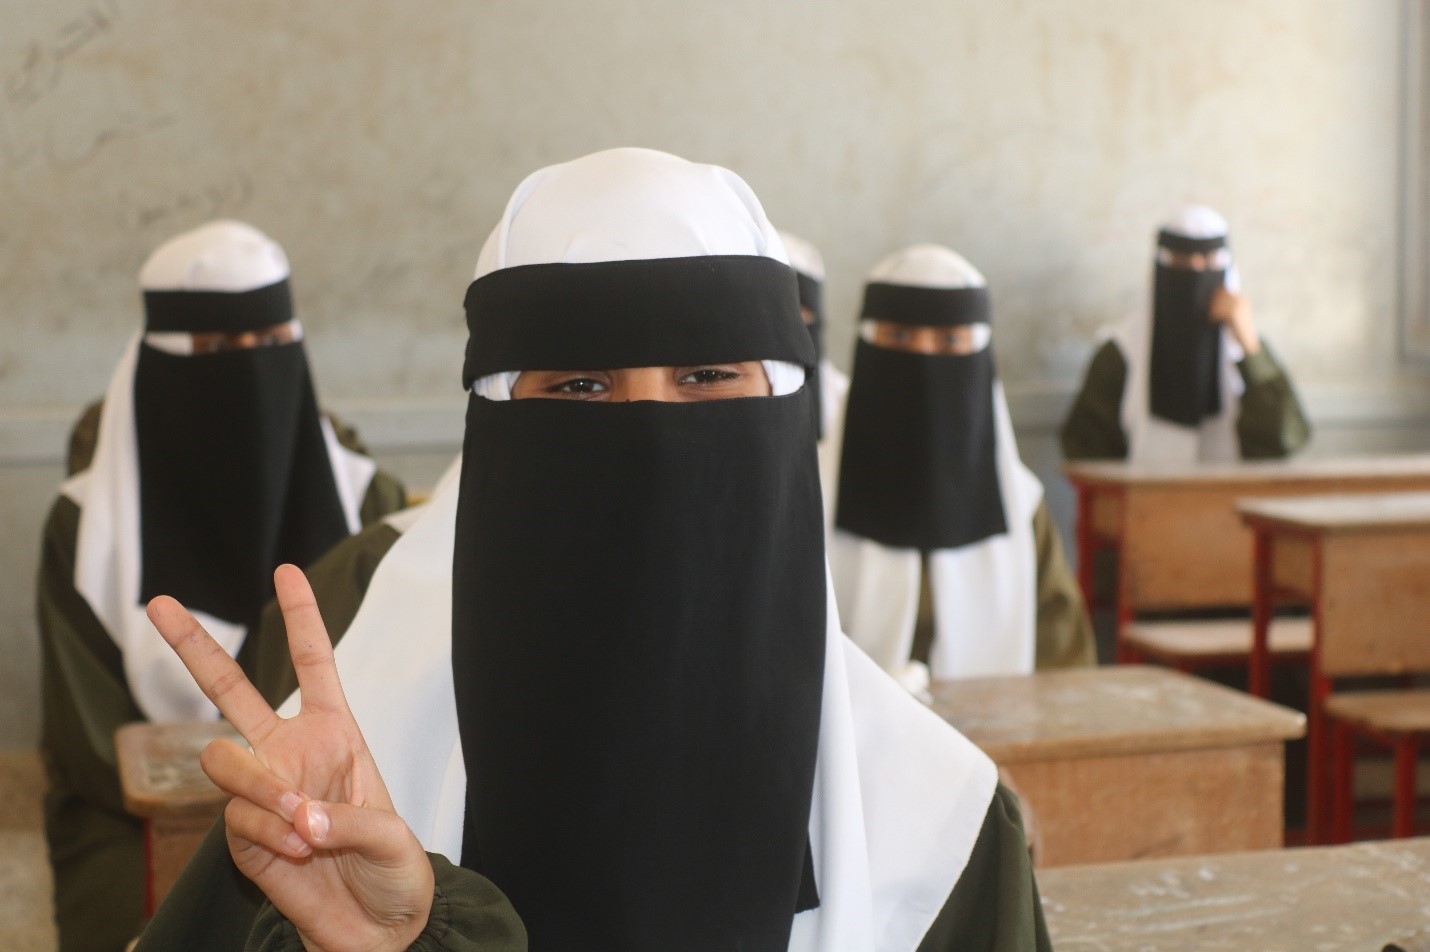 A group of women wearing black and white head coverings